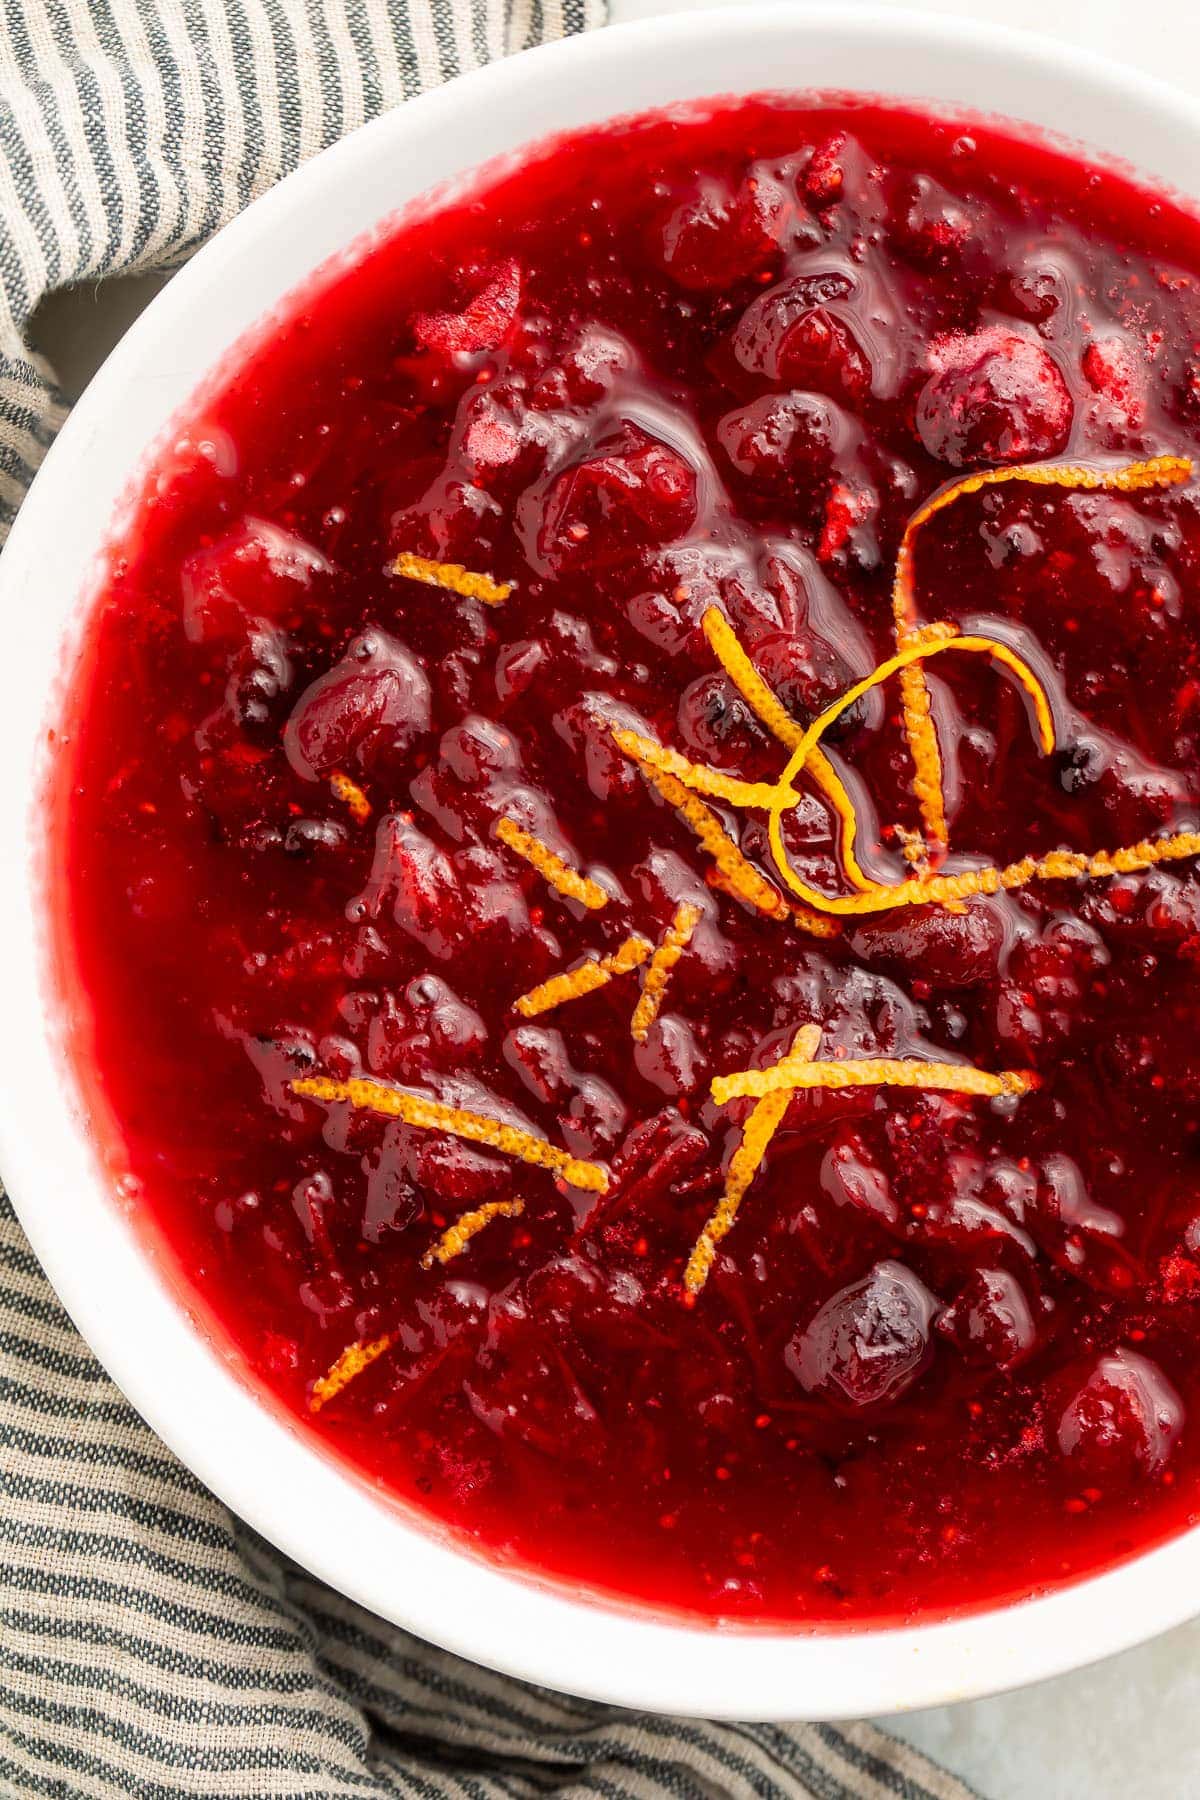 Top-down view of a large bowl of keto cranberry sauce topped with orange peel shavings.